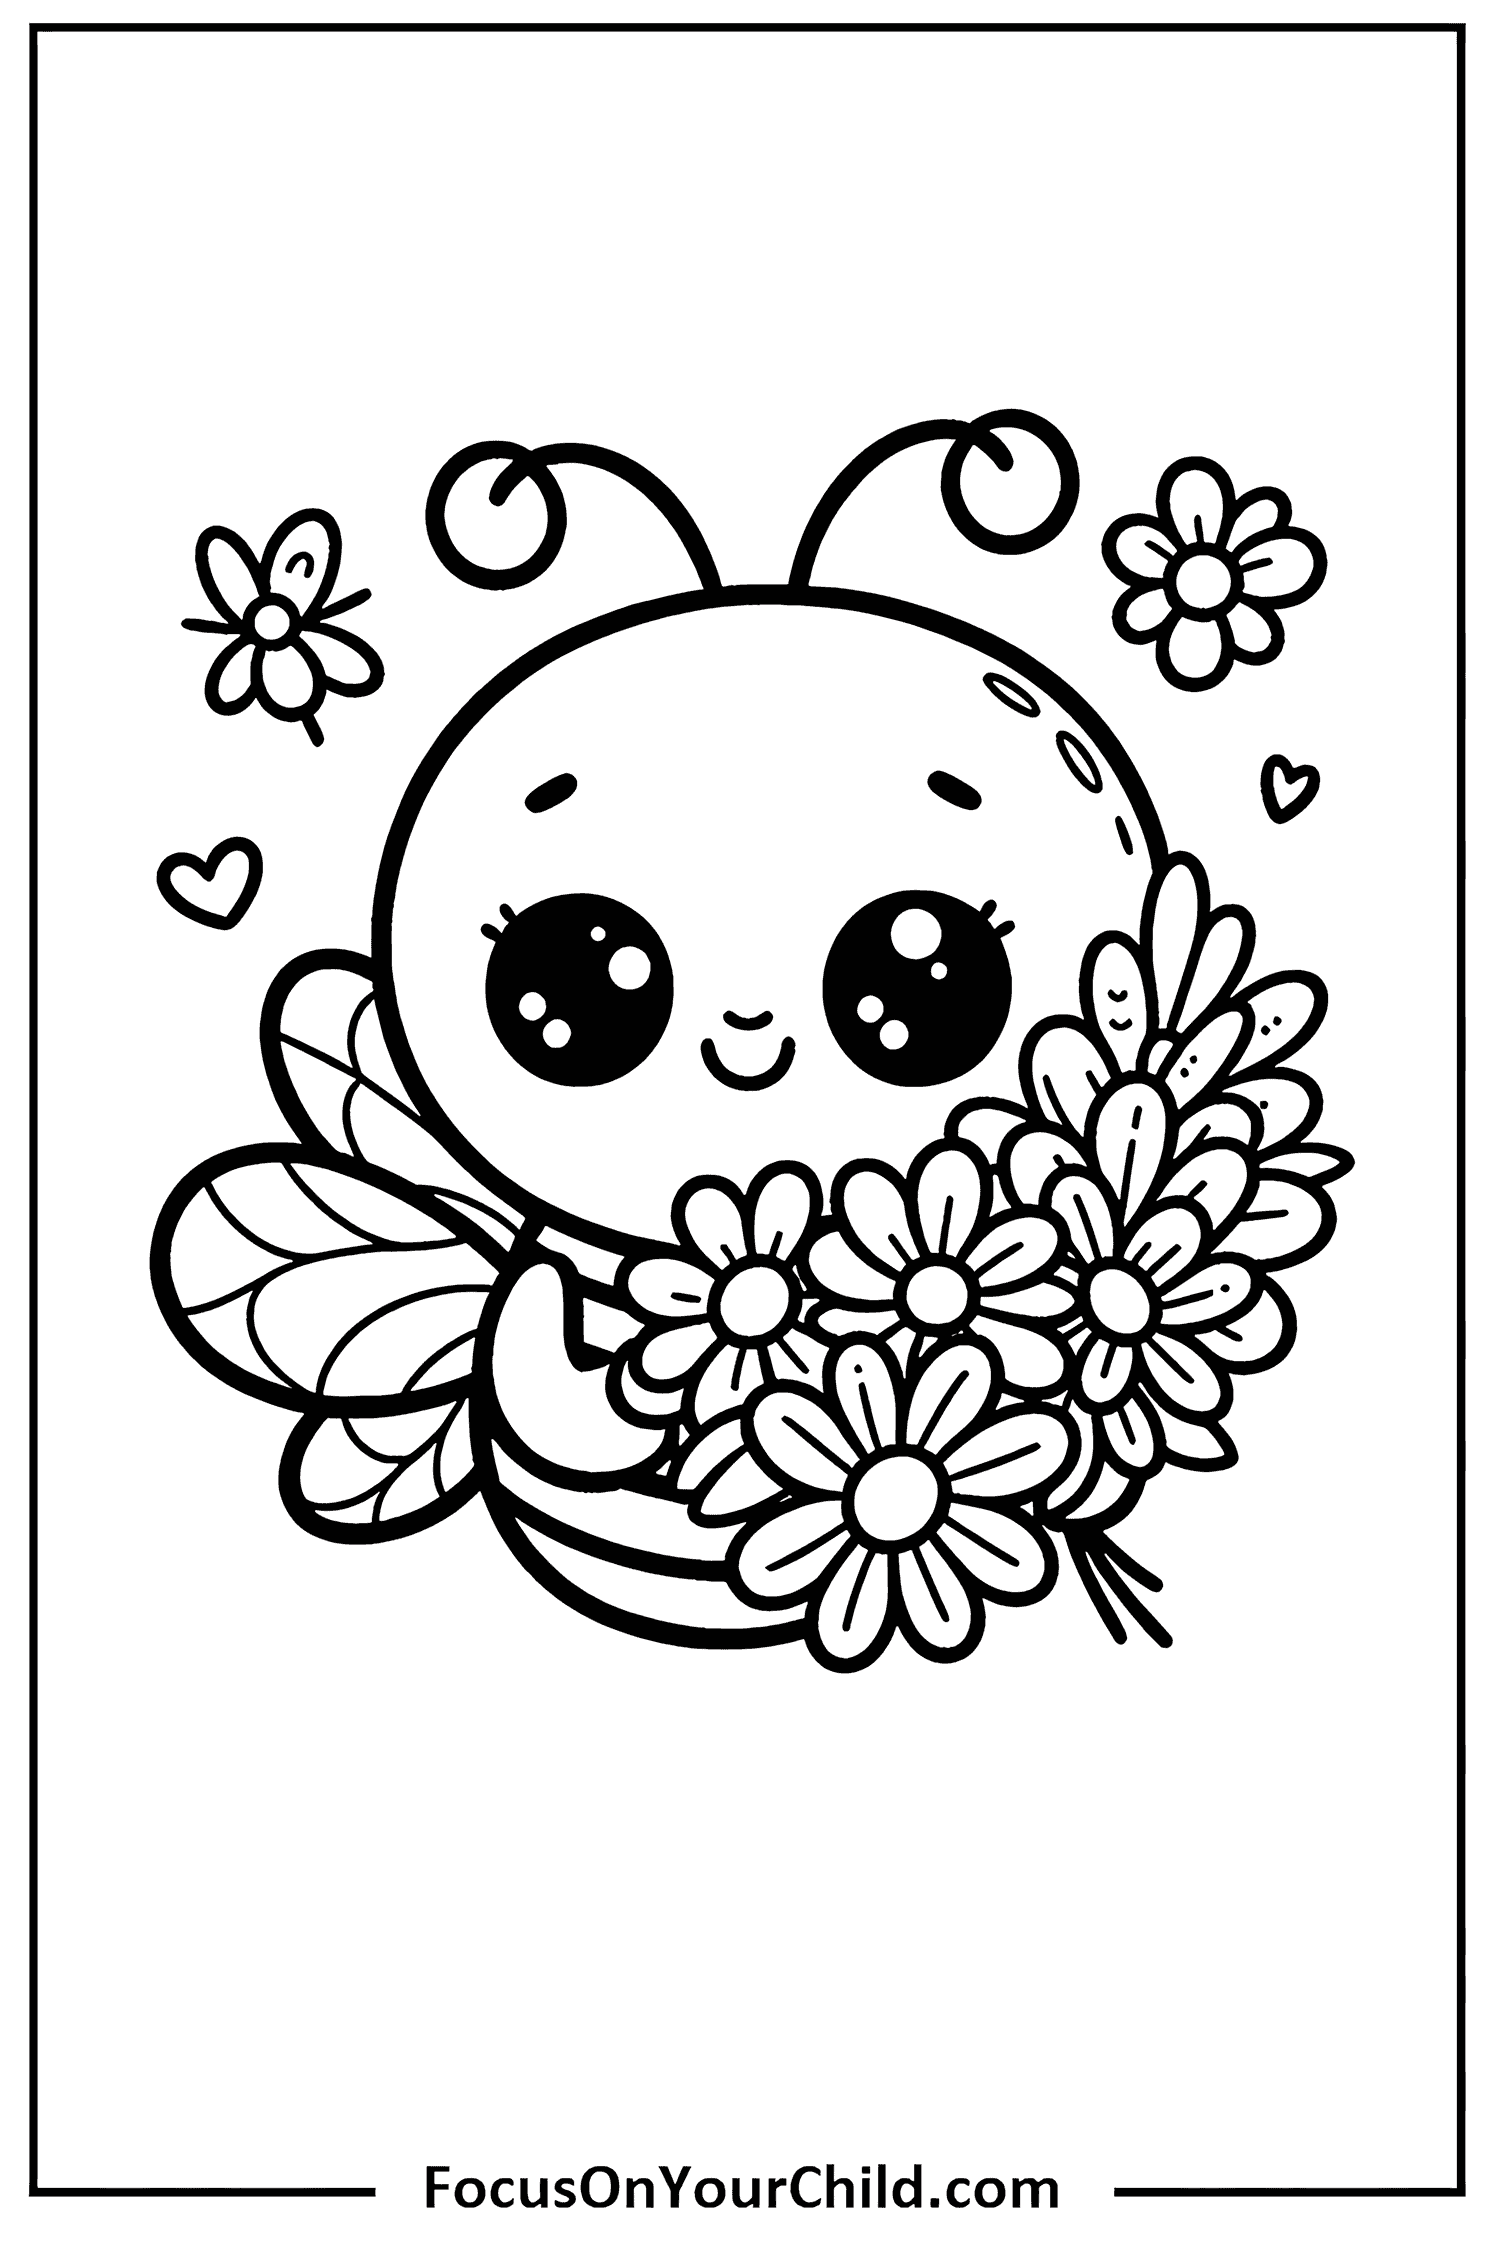 Happy bee holding flowers in a cute coloring page for children.